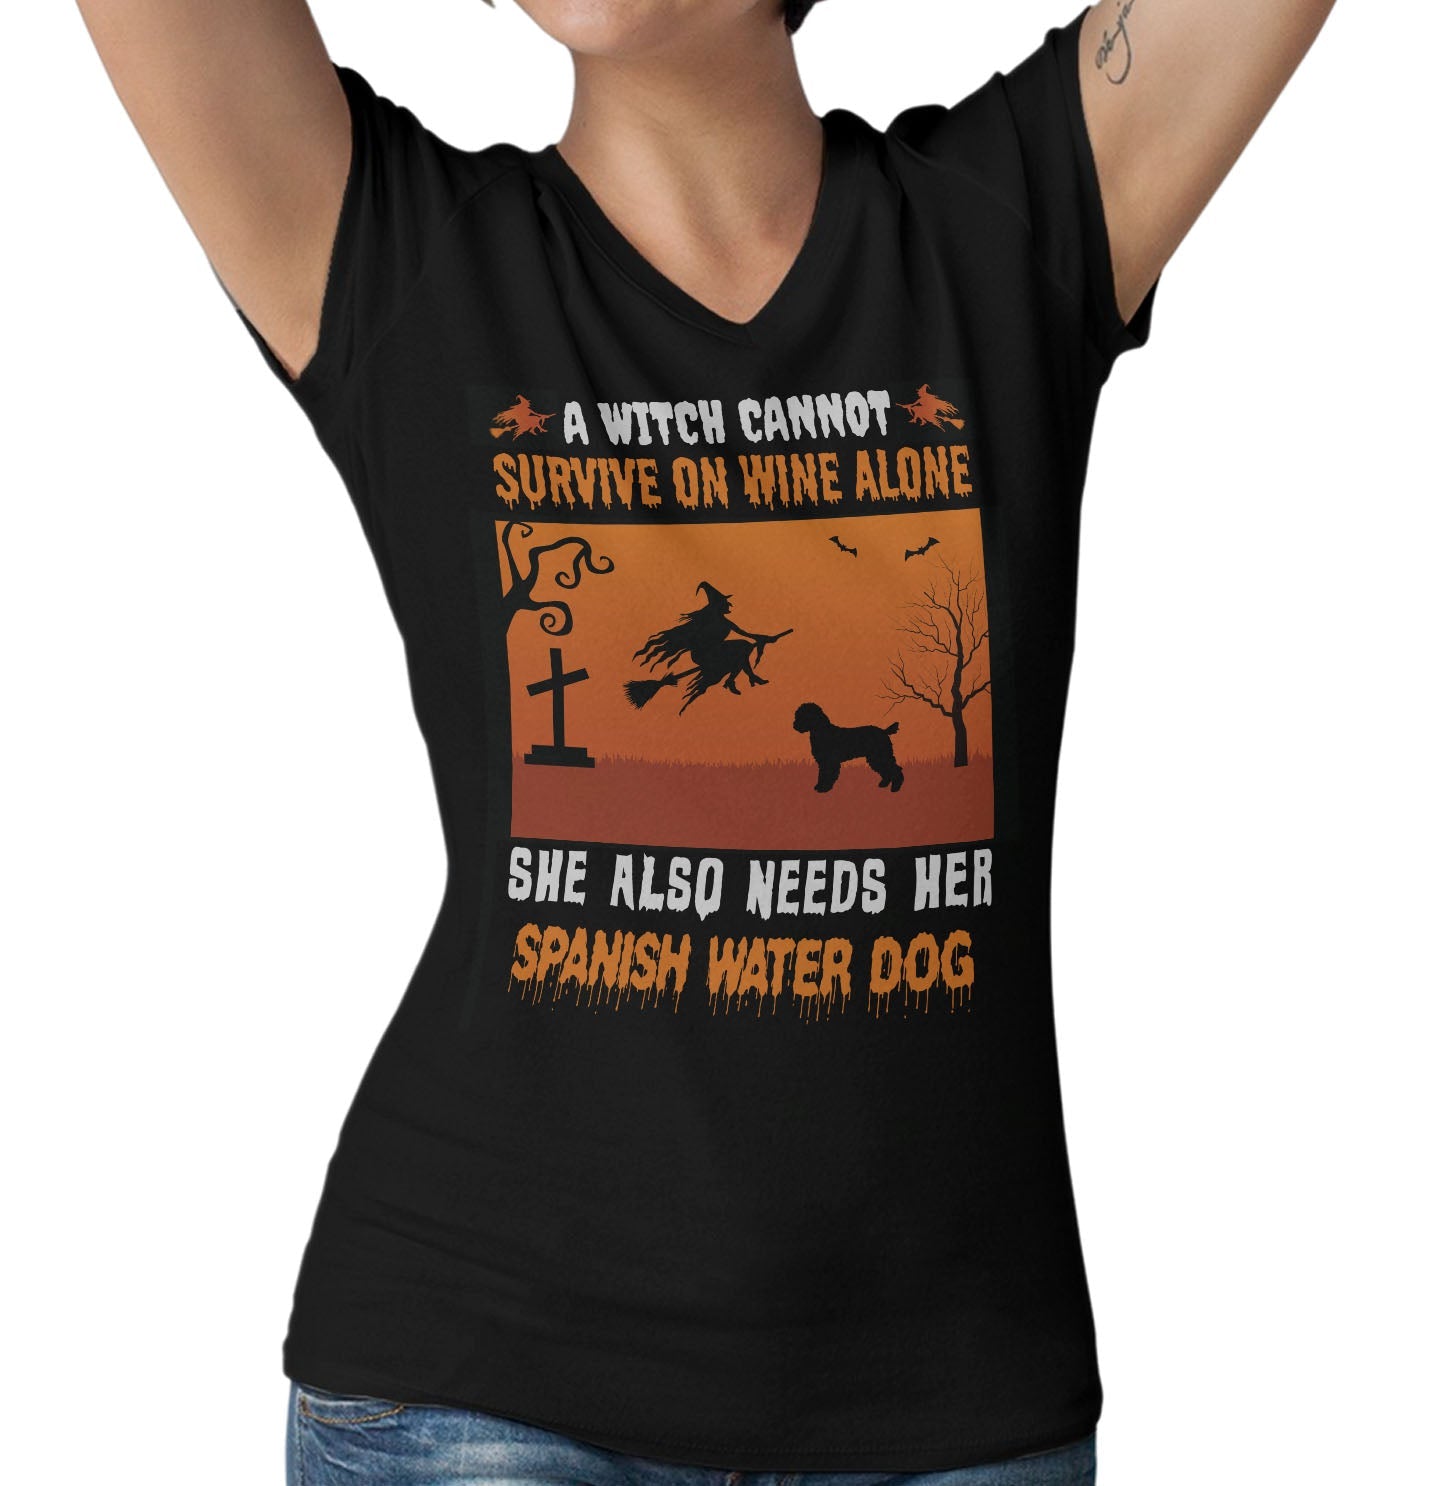 A Witch Needs Her Spanish Water Dog - Women's V-Neck T-Shirt